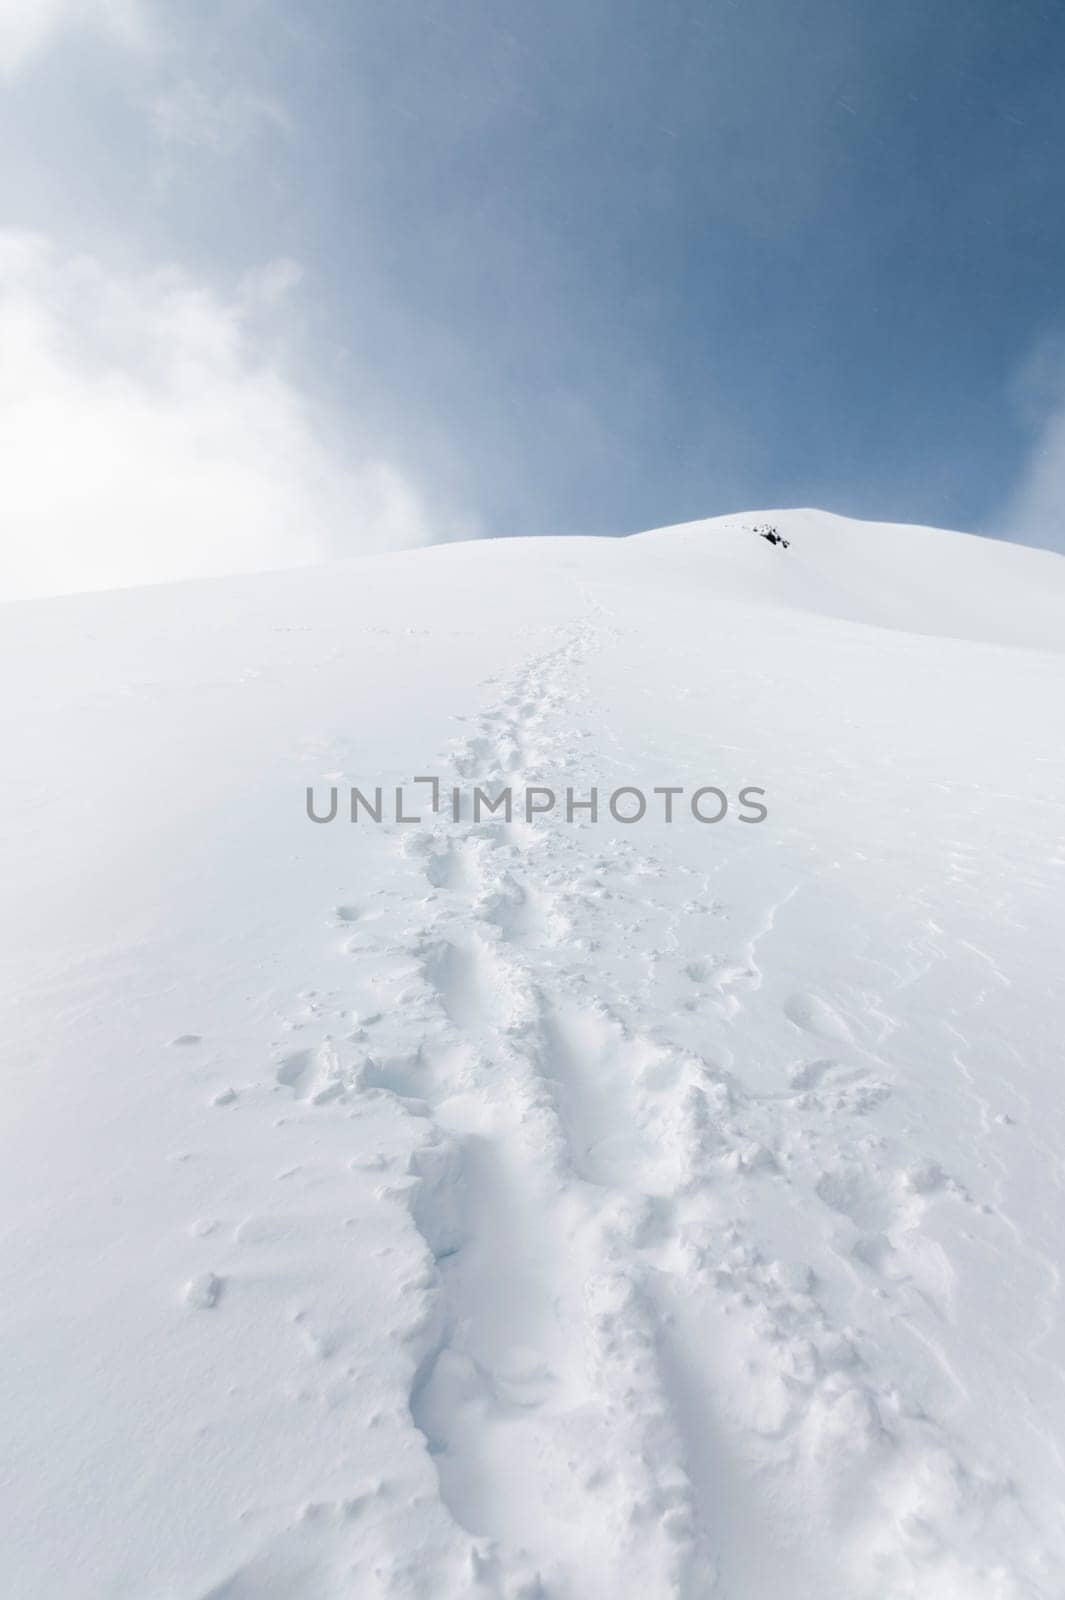 Landscape of snowy mountains with footprint on the snow during daytime in cloudy weather.